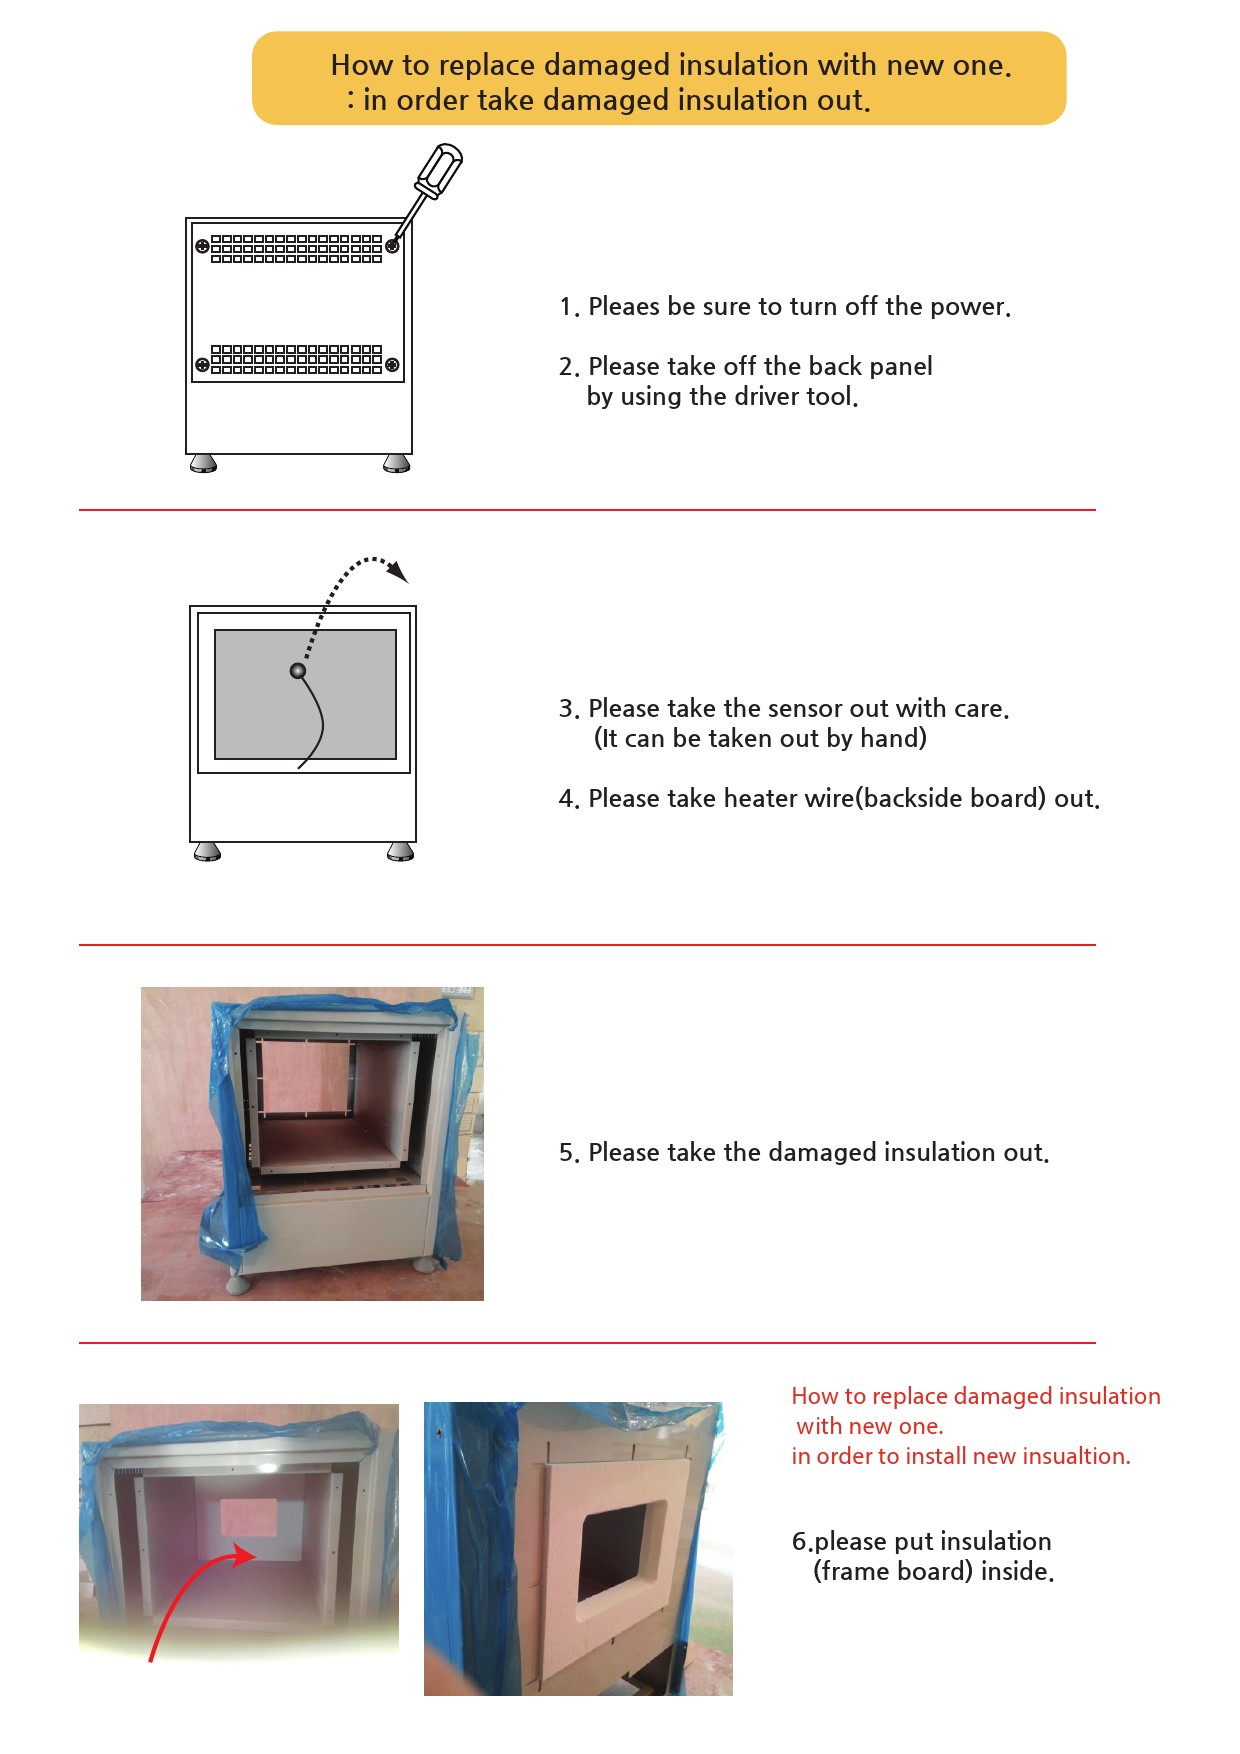 How to replace damaged insulation-1.jpg